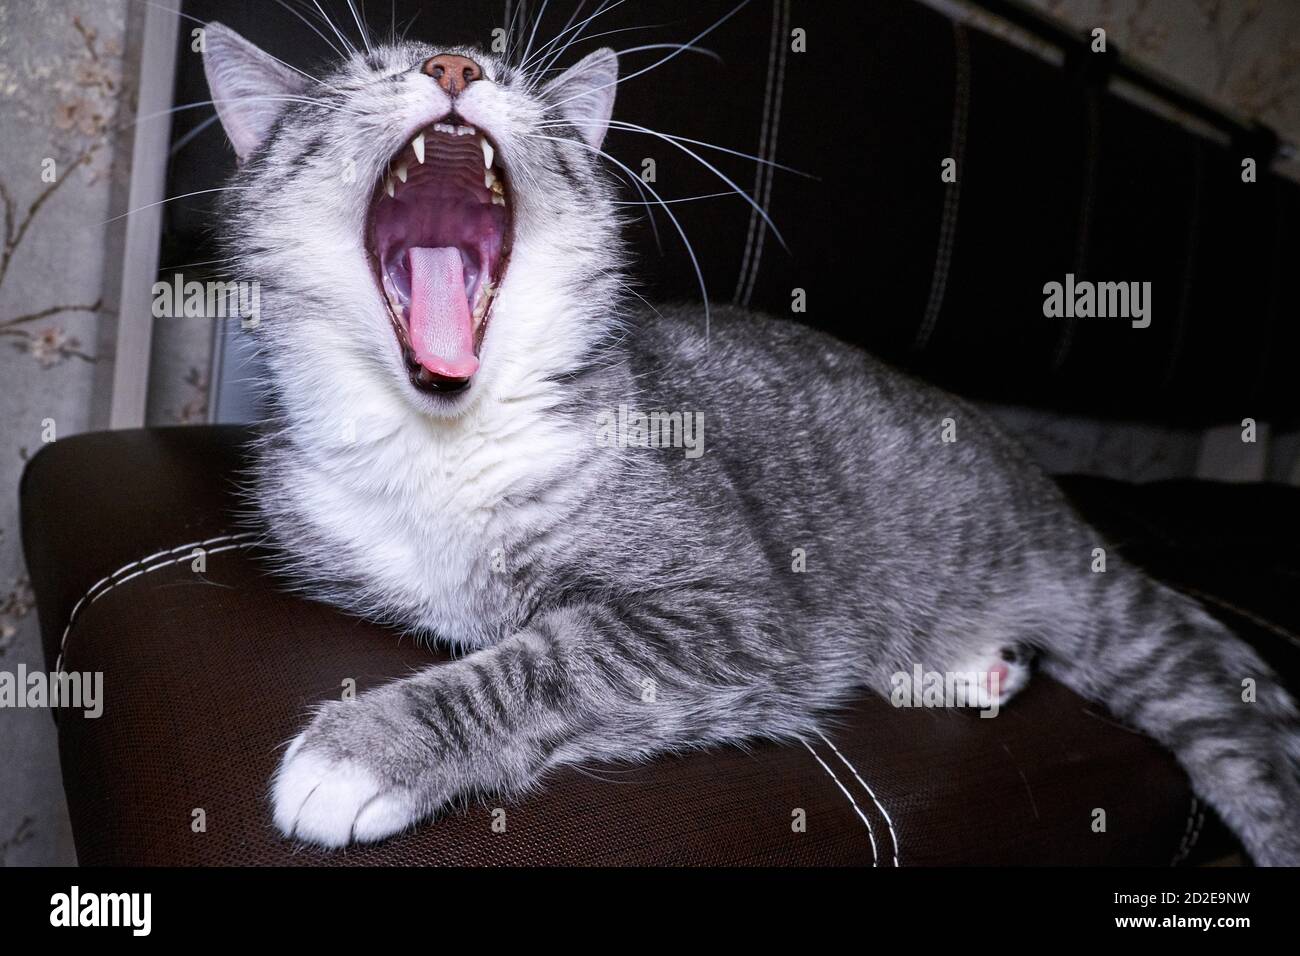 Cat yawns close-up on the couch. Macro photo throat, tongue and teeth. Cat's mouth wide open. Anatomy of the jaw feline. Stock Photo